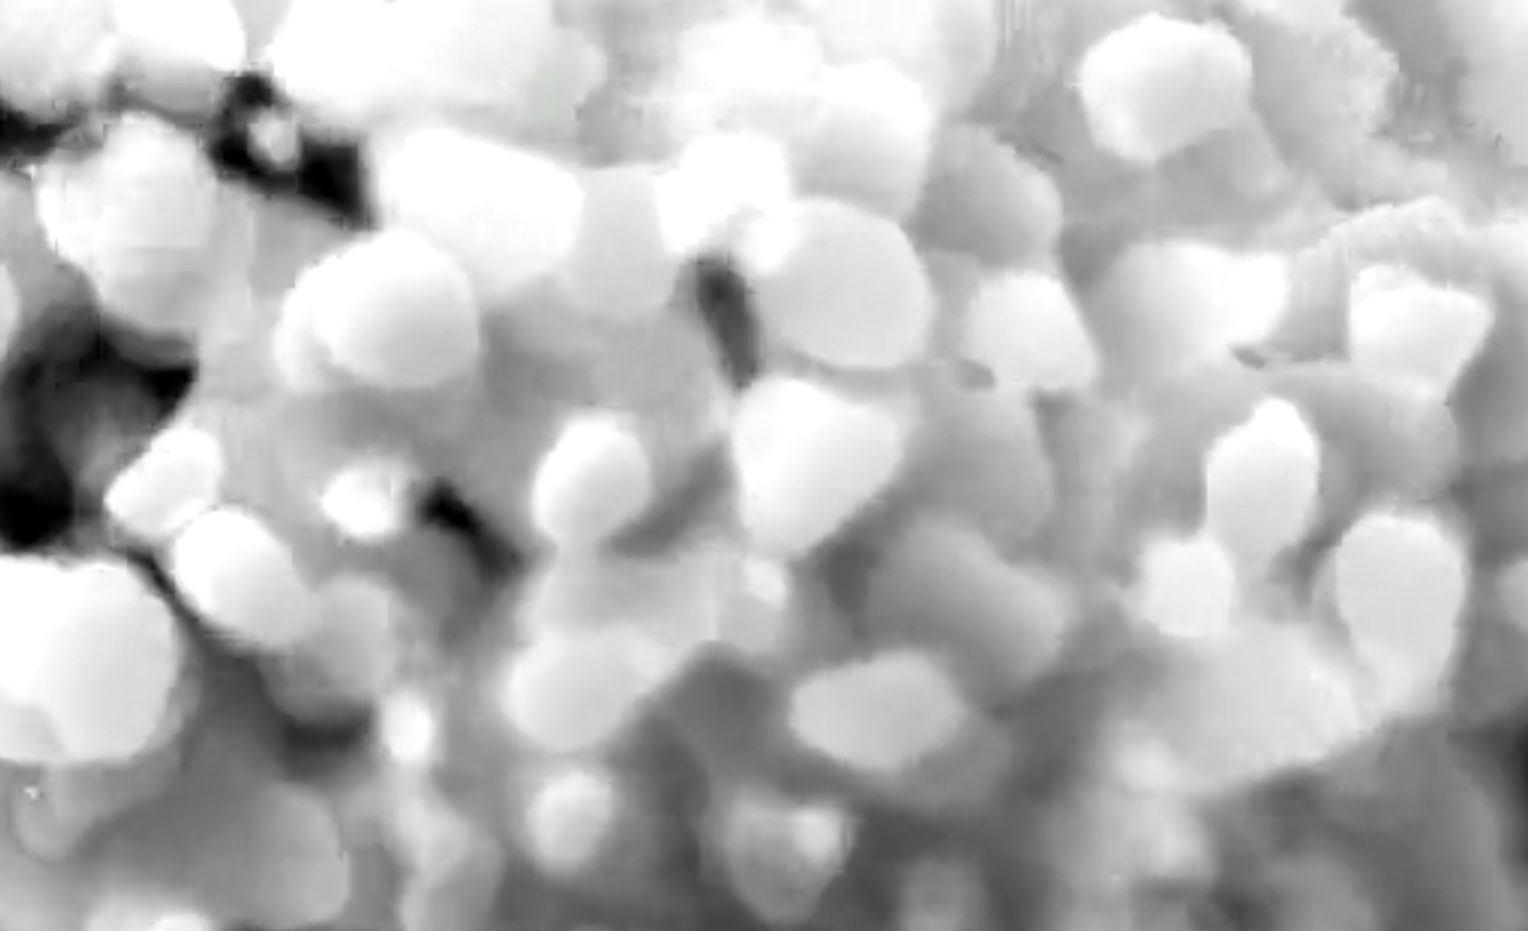 Particles in aftereffects, electronic microscope texture.